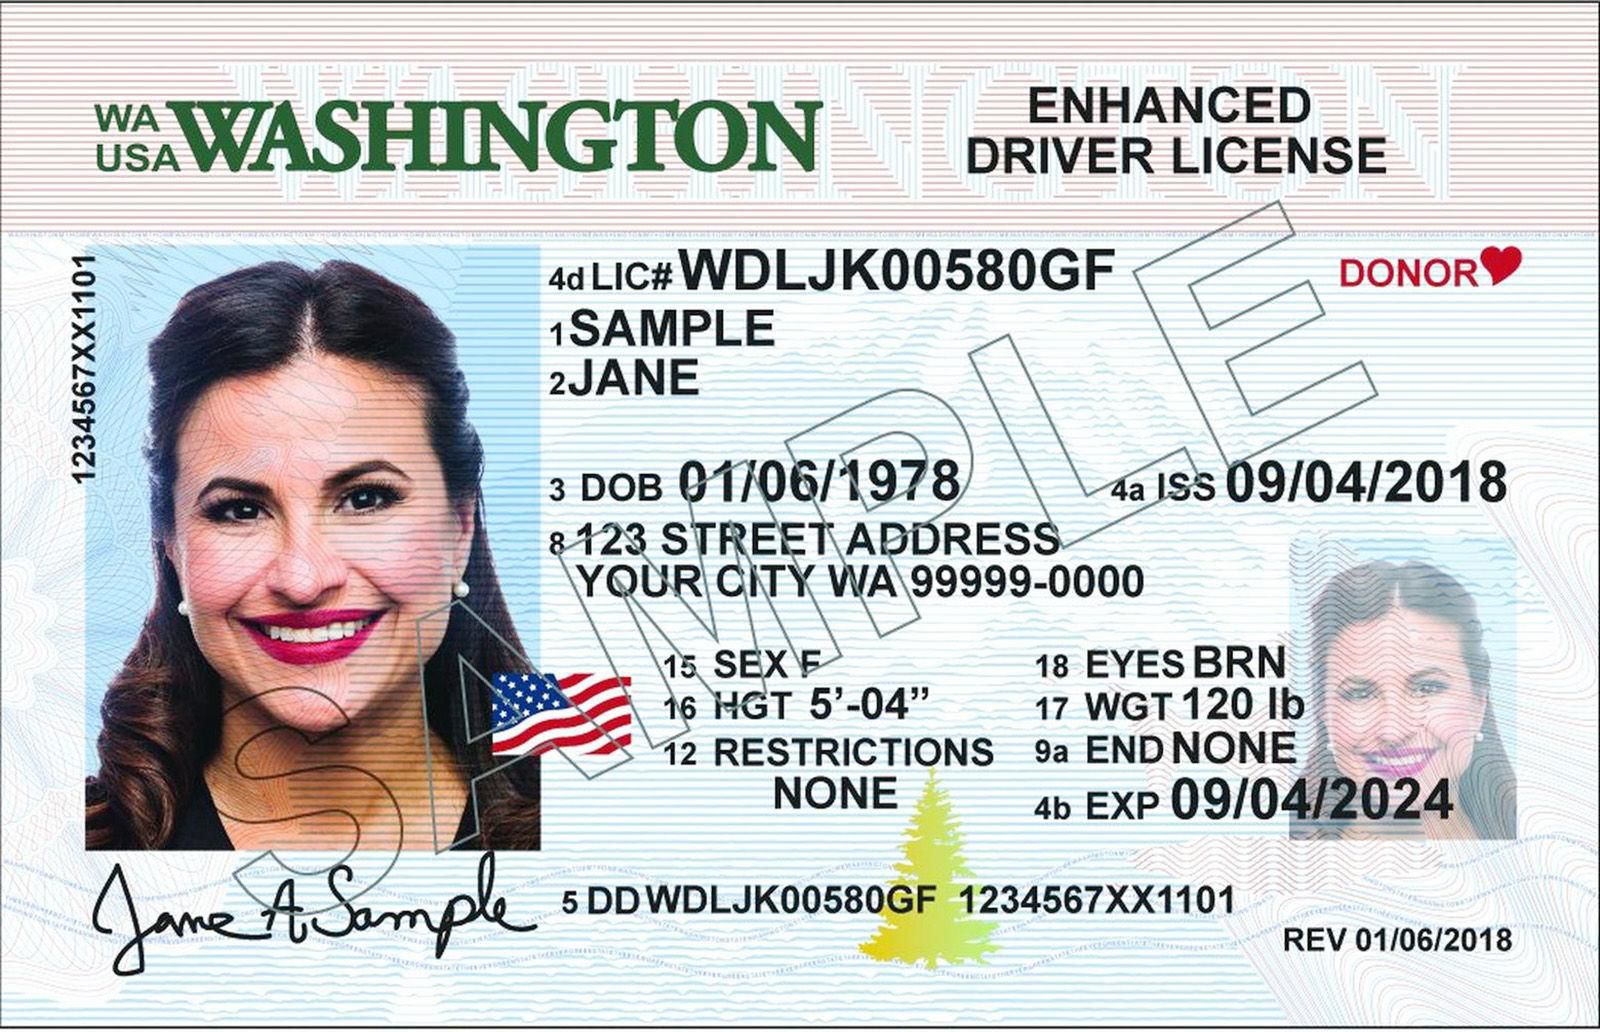 what does dd on drivers license mean